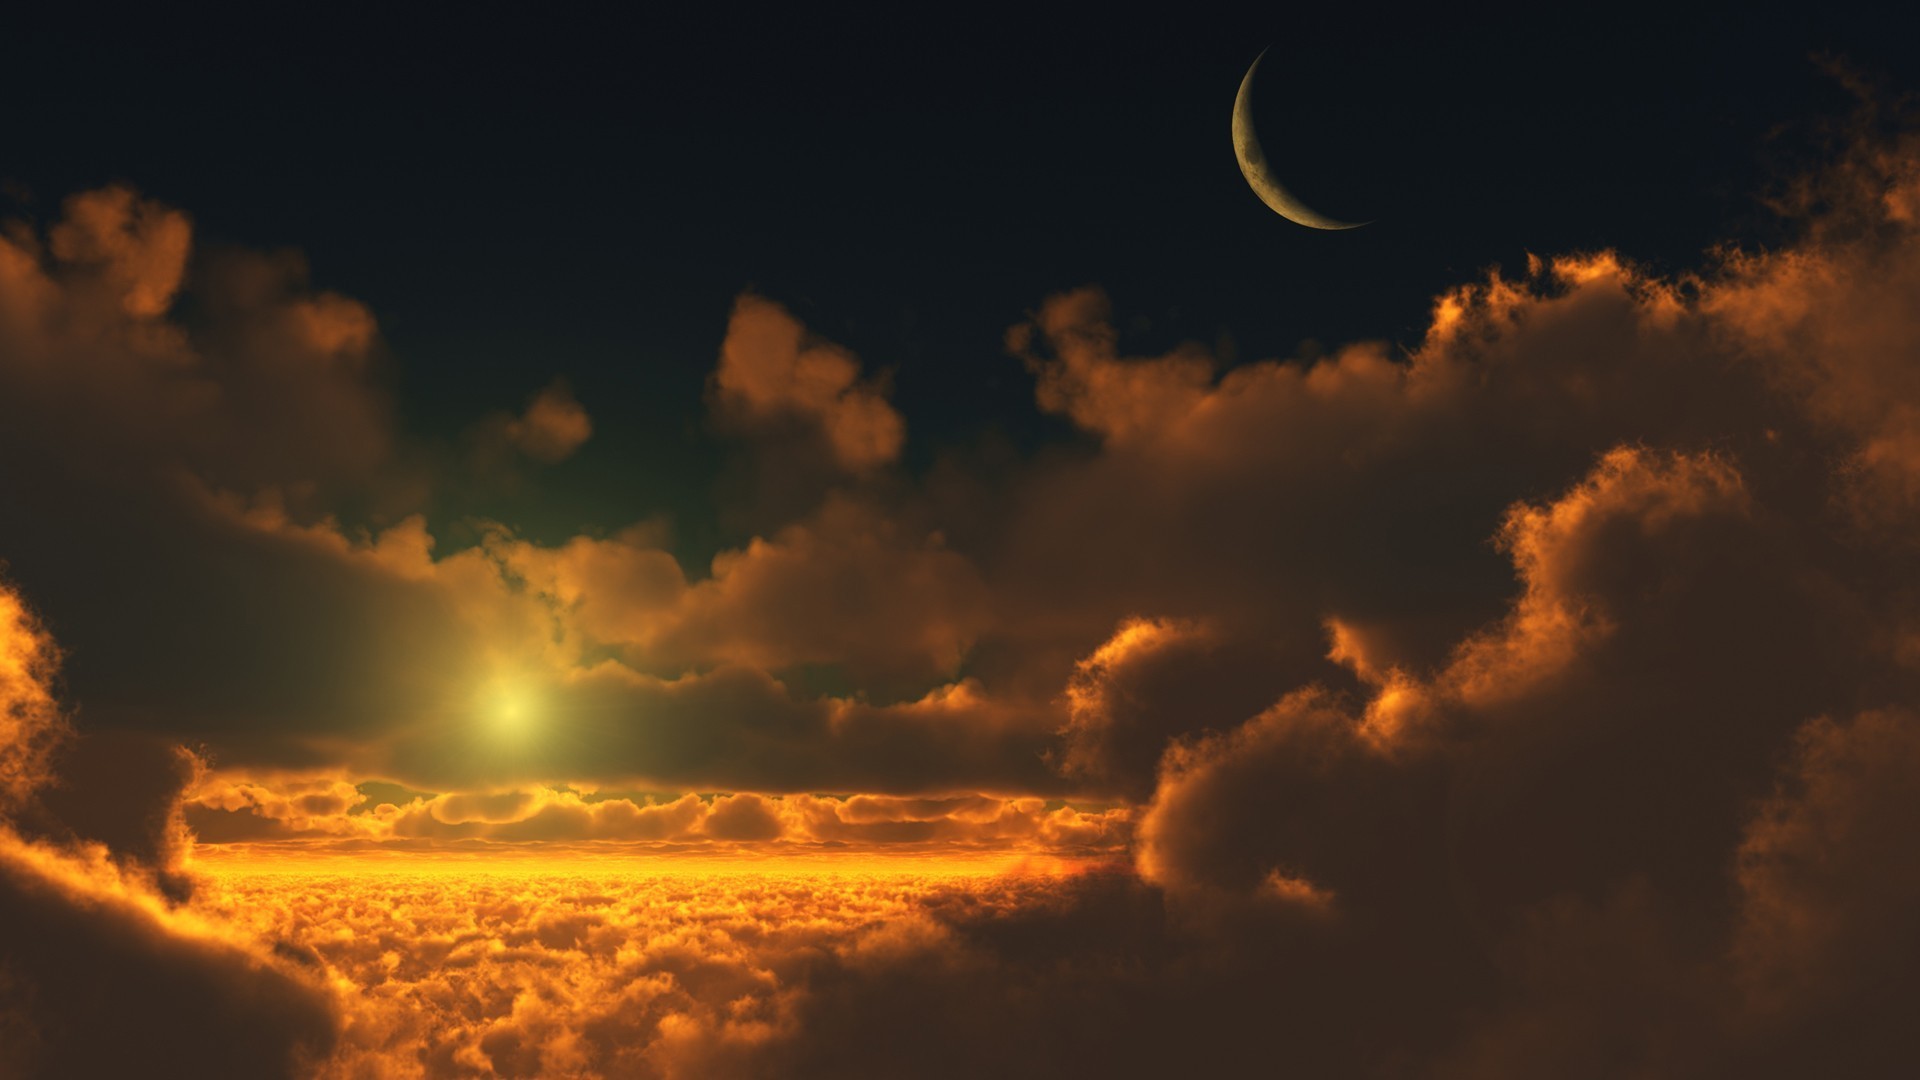 1920x1080 Sunset and moonrise wallpaper #3440 Â· sun and moon ...